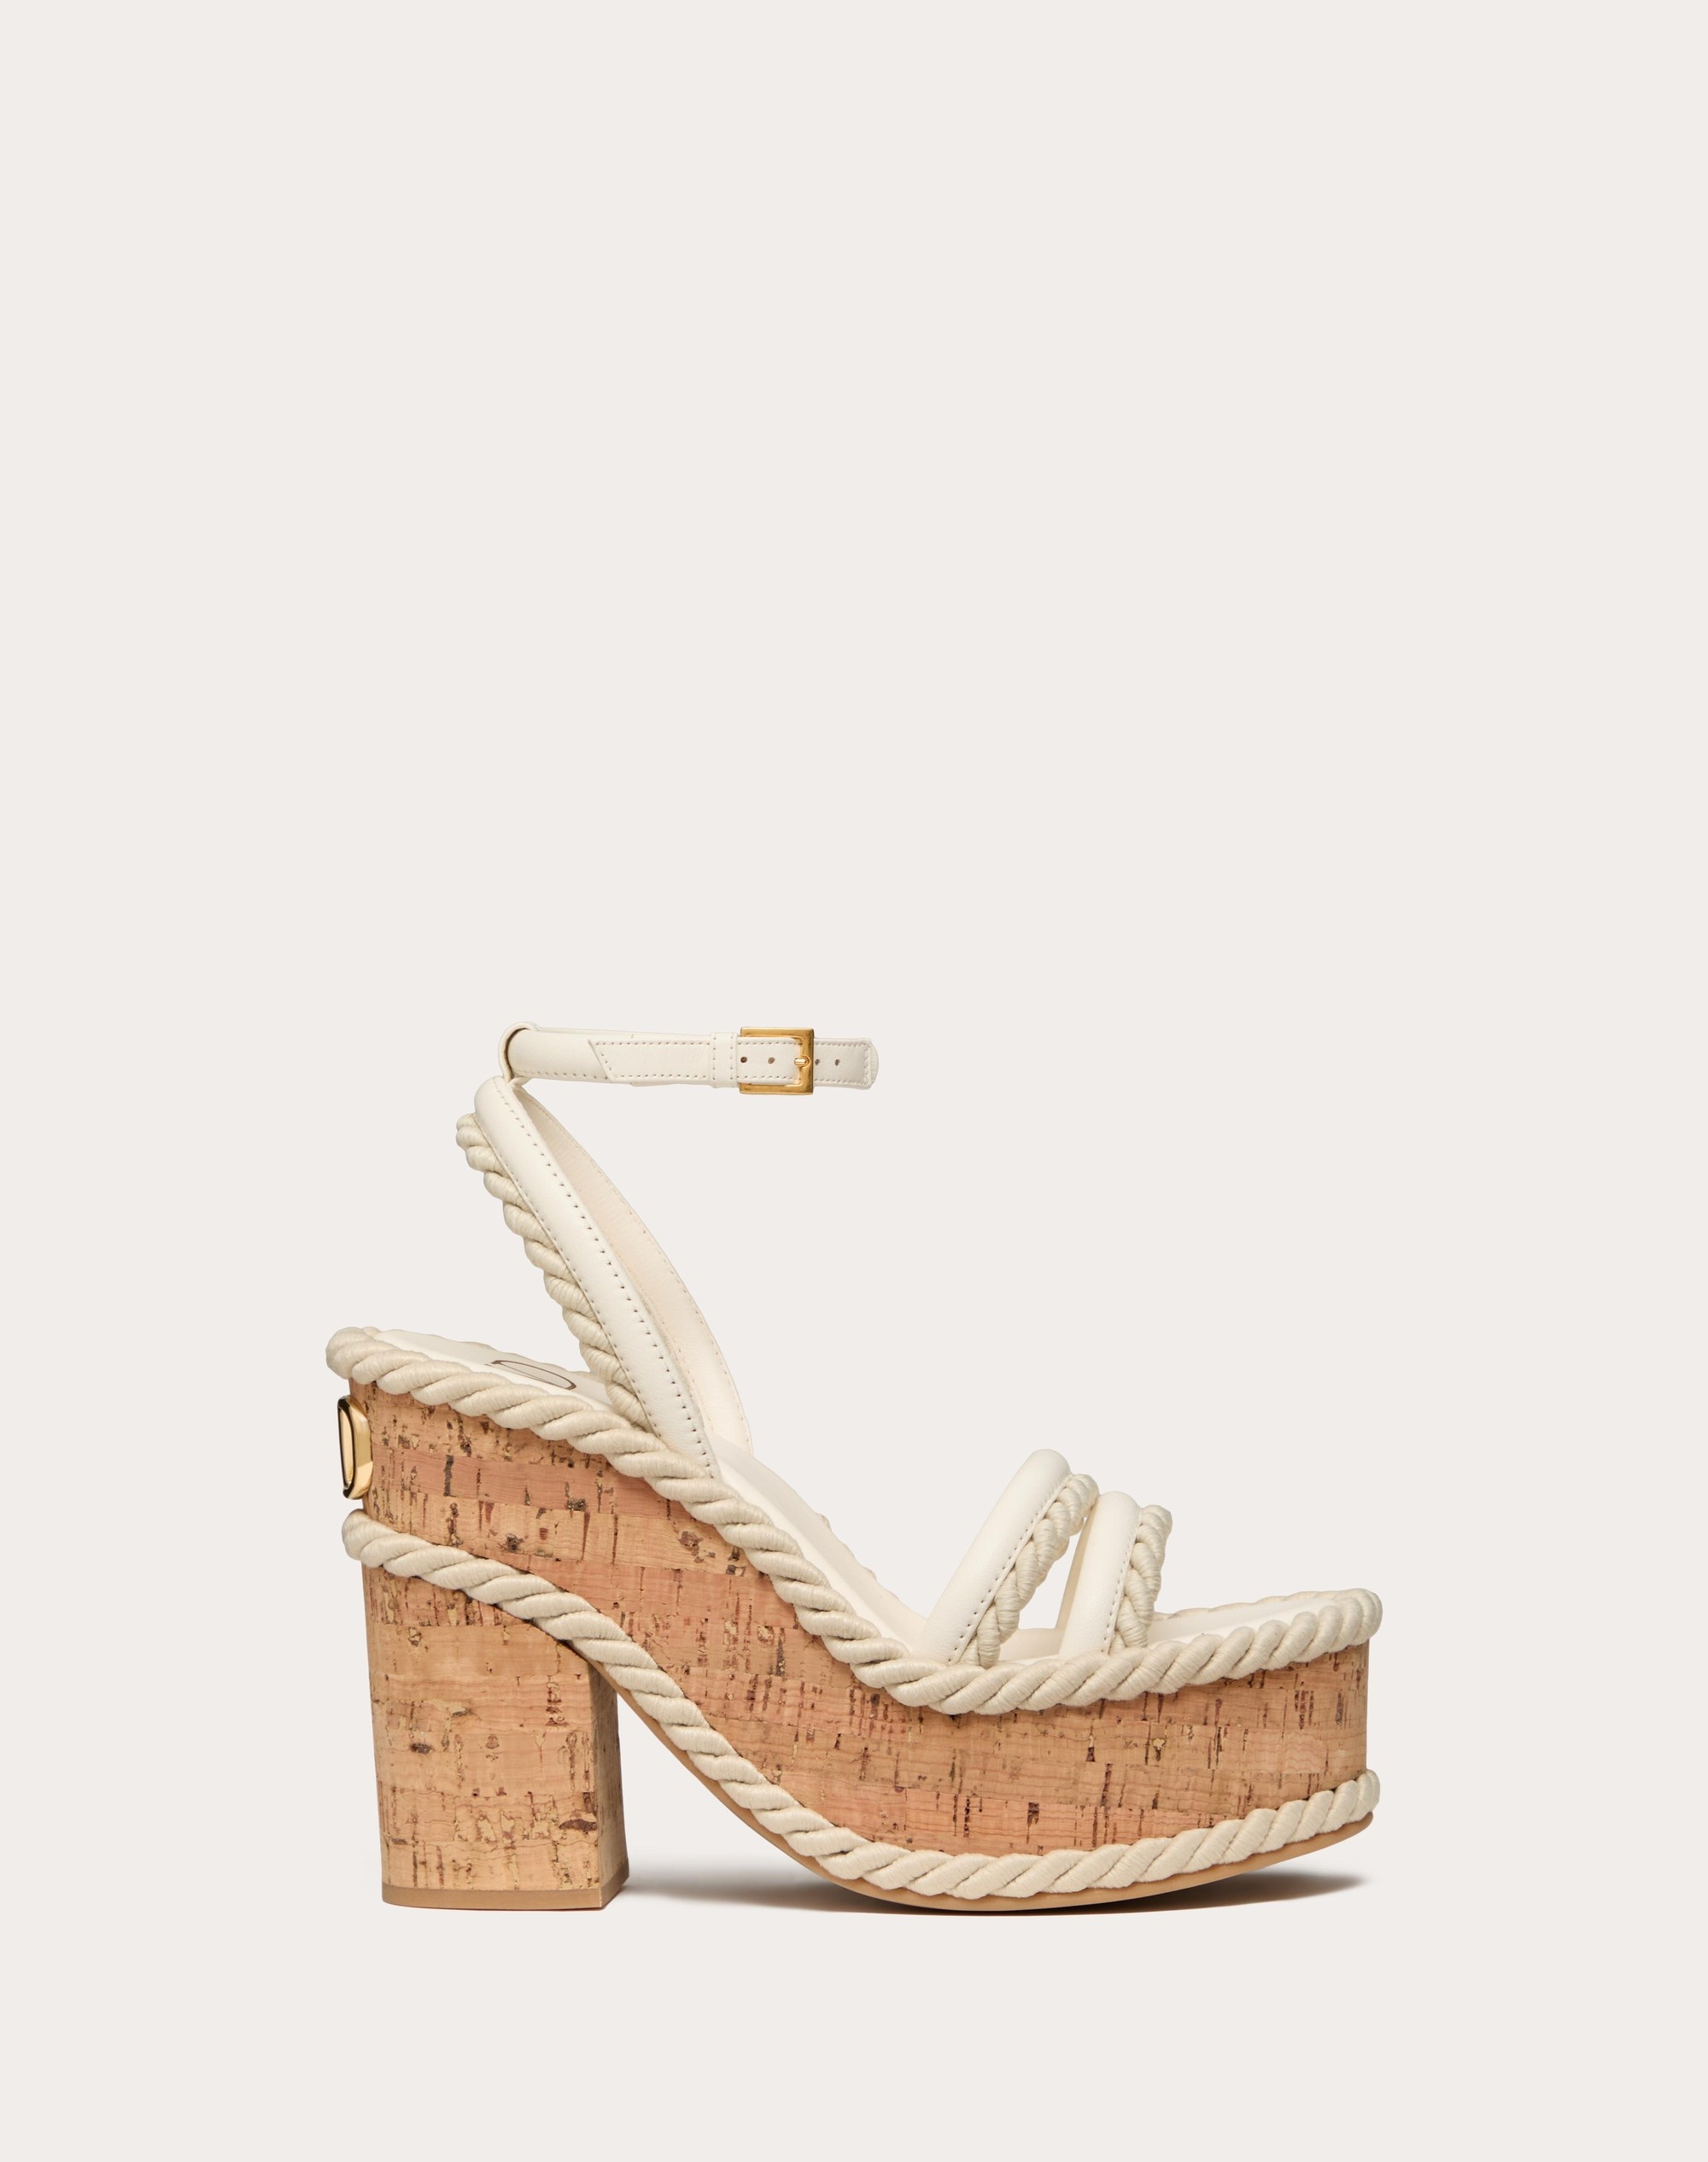 VLOGO SUMMERBLOCKS WEDGE SANDAL IN NAPPA LEATHER AND ROPE TORCHON 130MM - 1